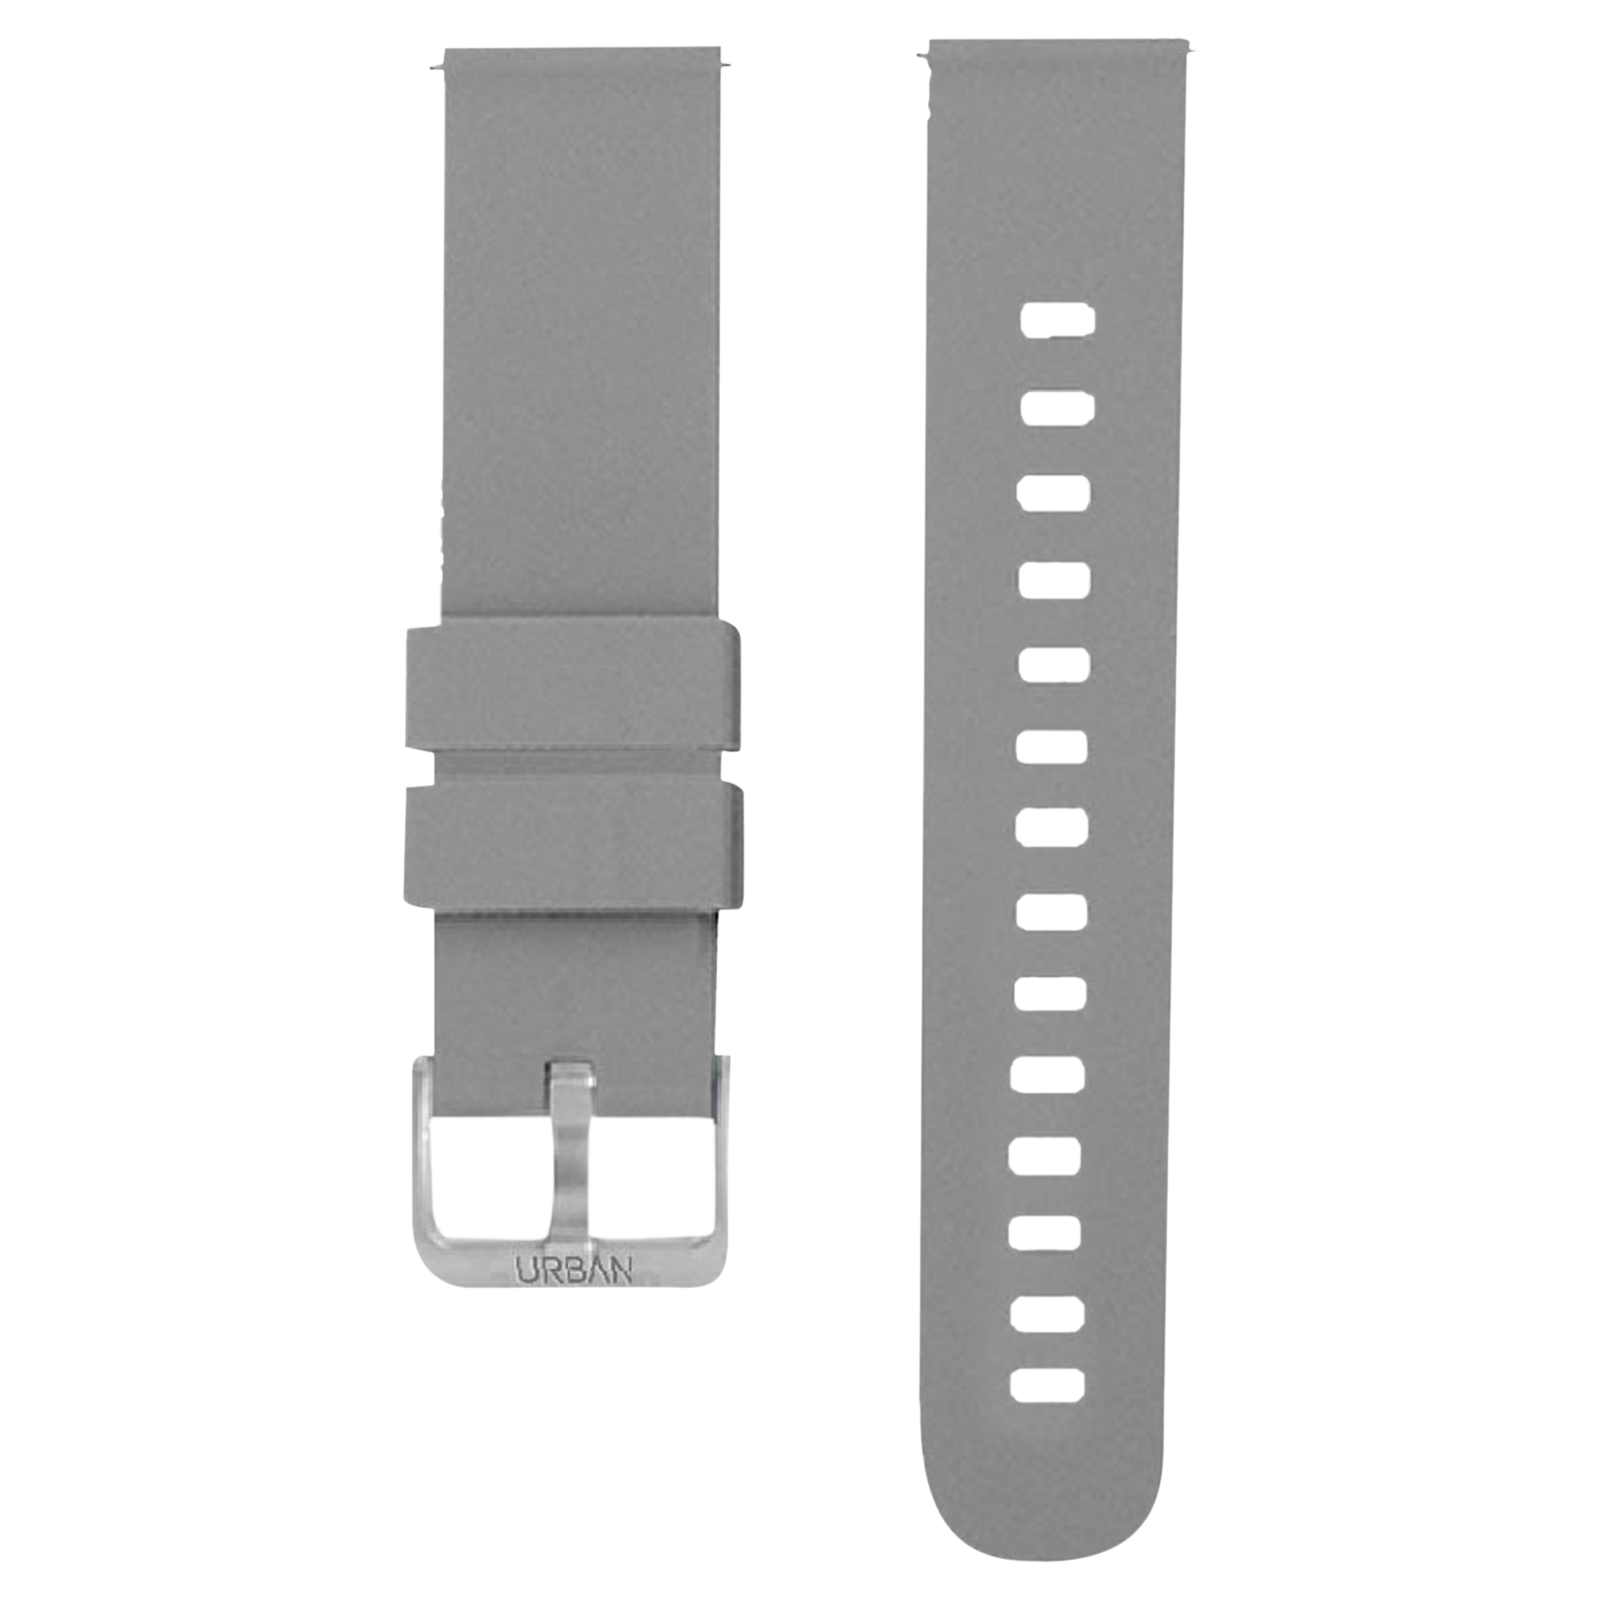 Inbase IB-1803 Silicone Strap for Smart Watch (20mm) (Durable & Strong, Grey)